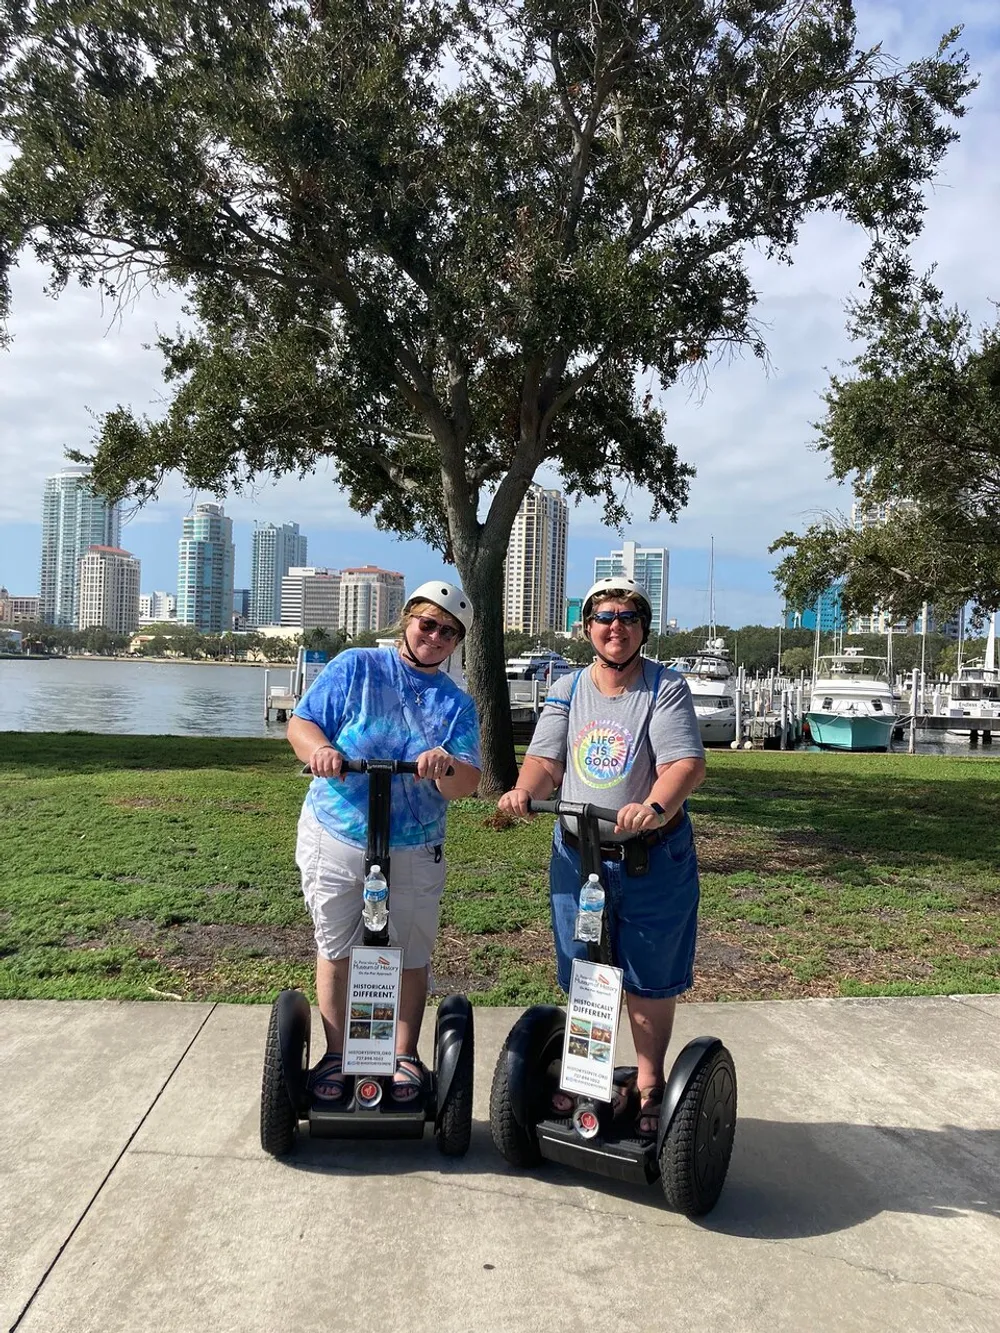 Two people are standing on Segways enjoying a sunny day outdoors with a backdrop of skyscrapers and a marina